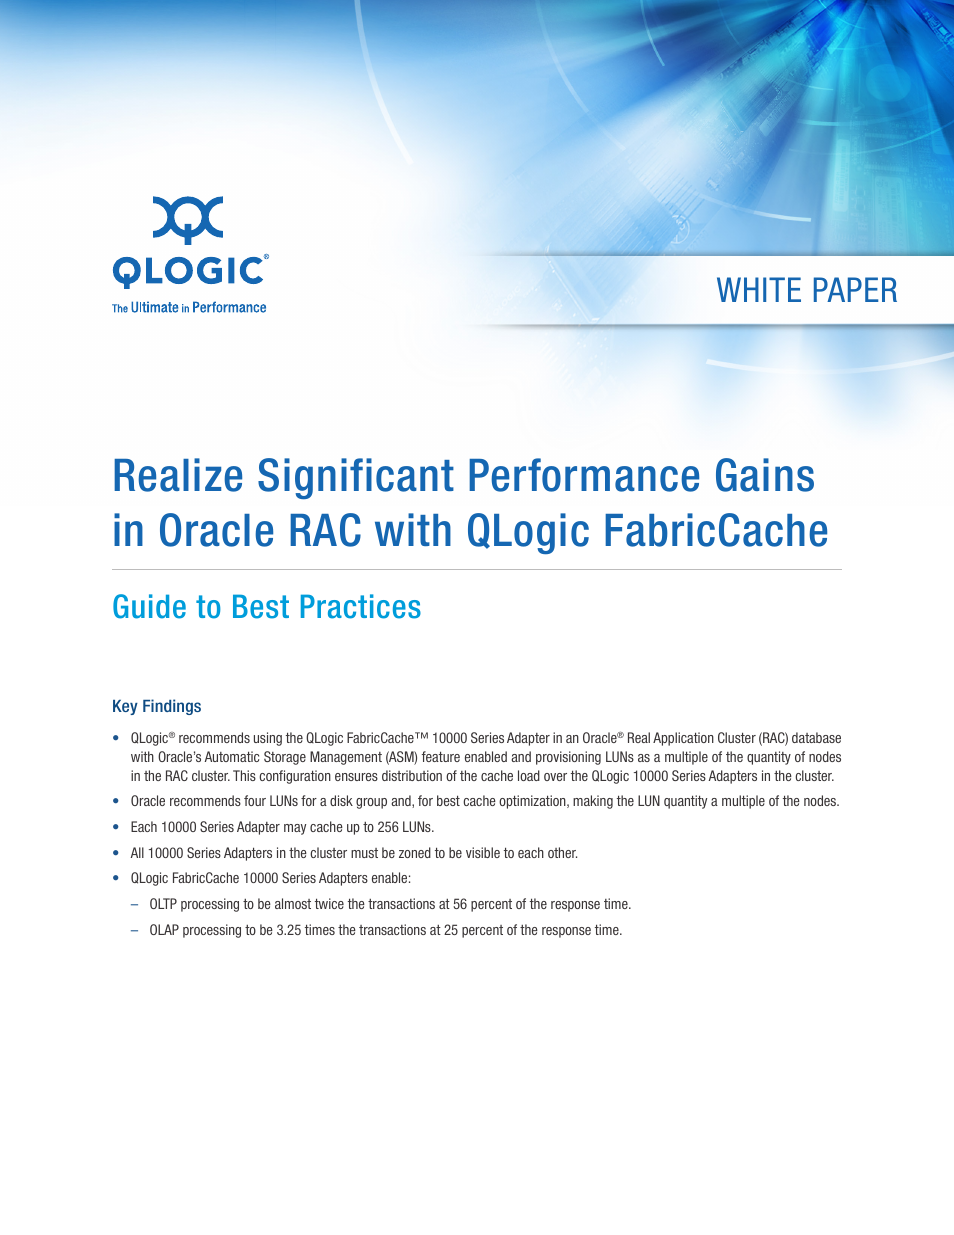 10000 Series Realize Significant Performance Gains in Oracle RAC with QLogic FabricCache